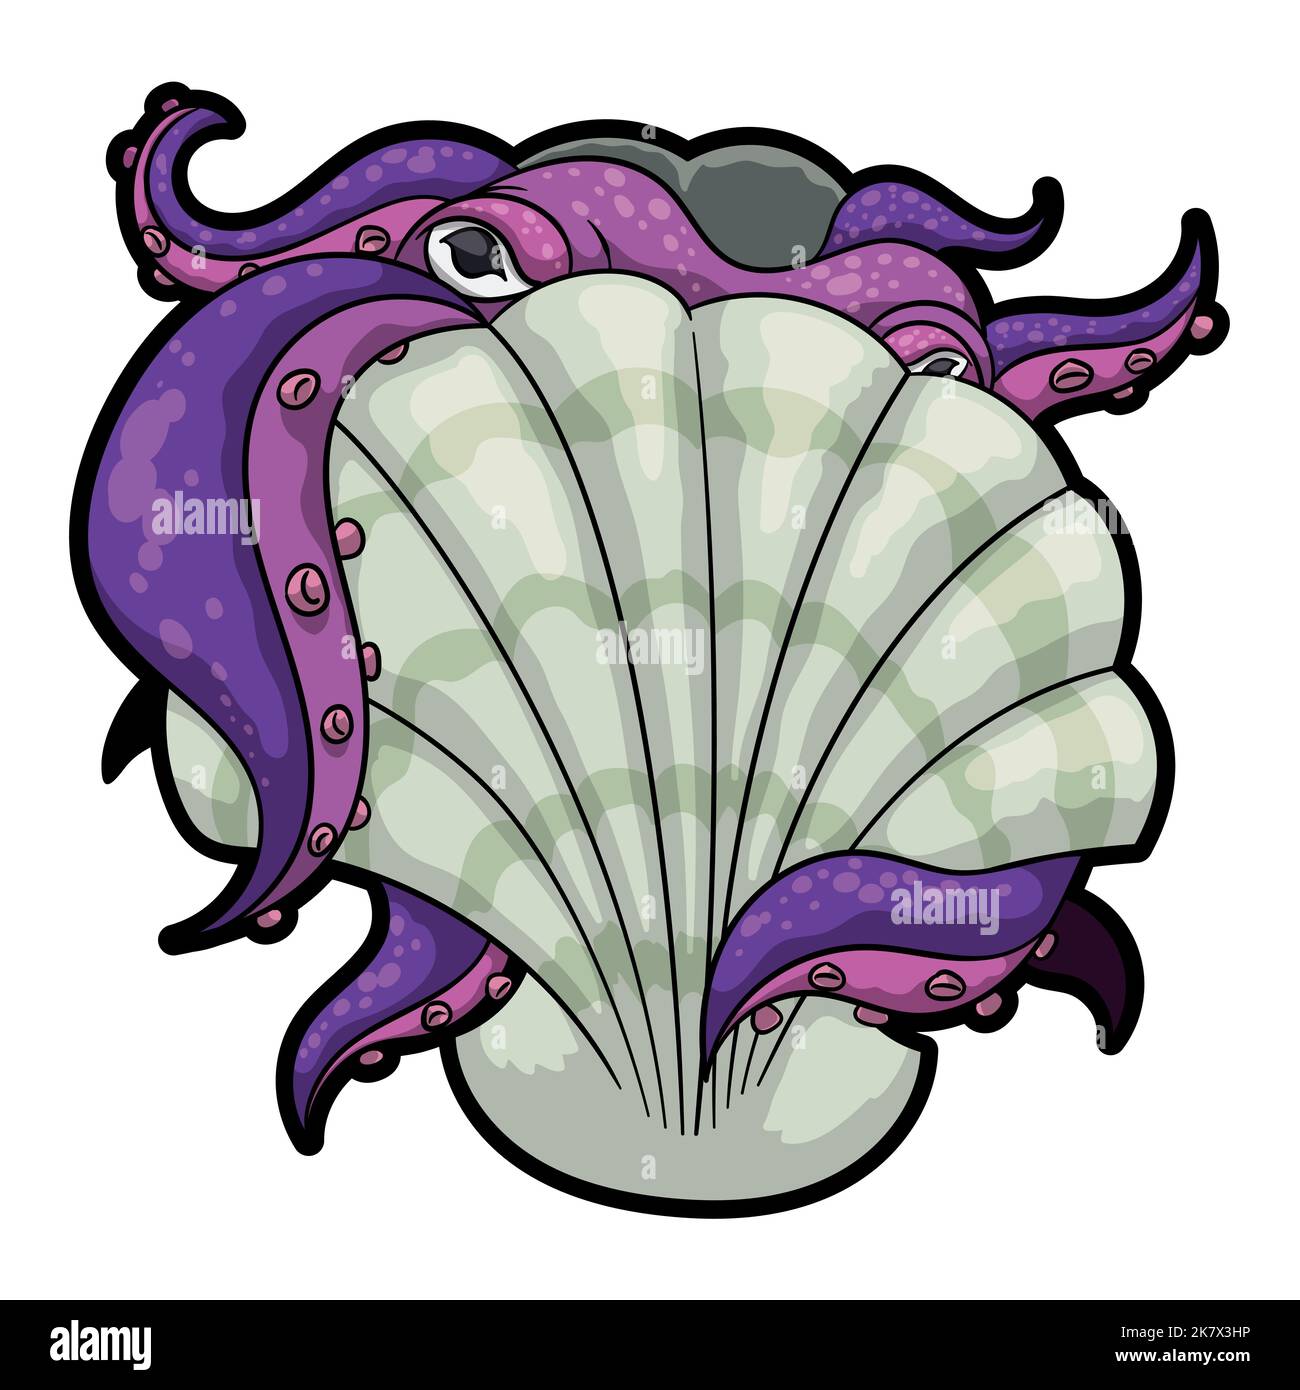 Purple and shy octopus inside a scallop shell, embracing it with its tentacles. Stock Vector